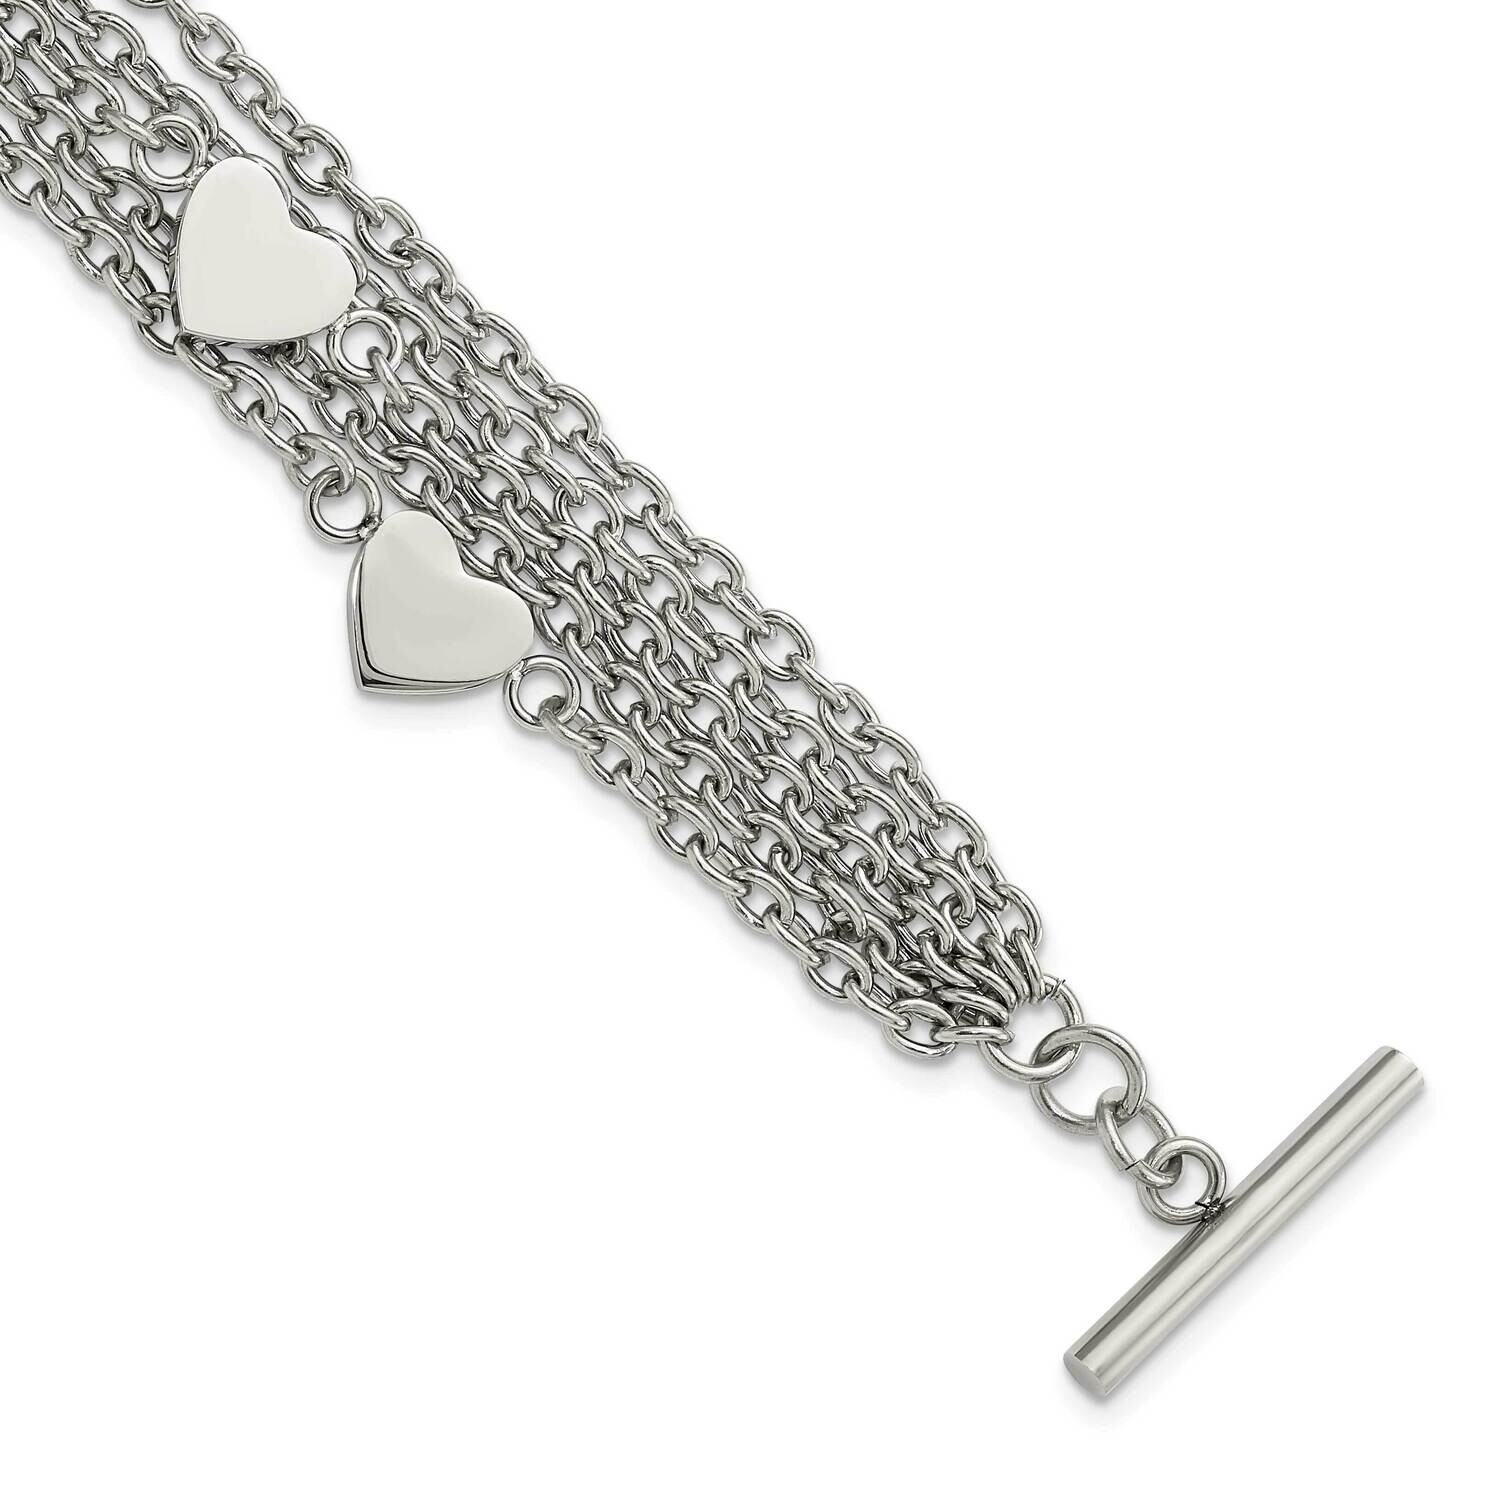 Polished MultistrHearts Chain Toggle Bracelet 8 Inch Stainless Steel SRB756-8